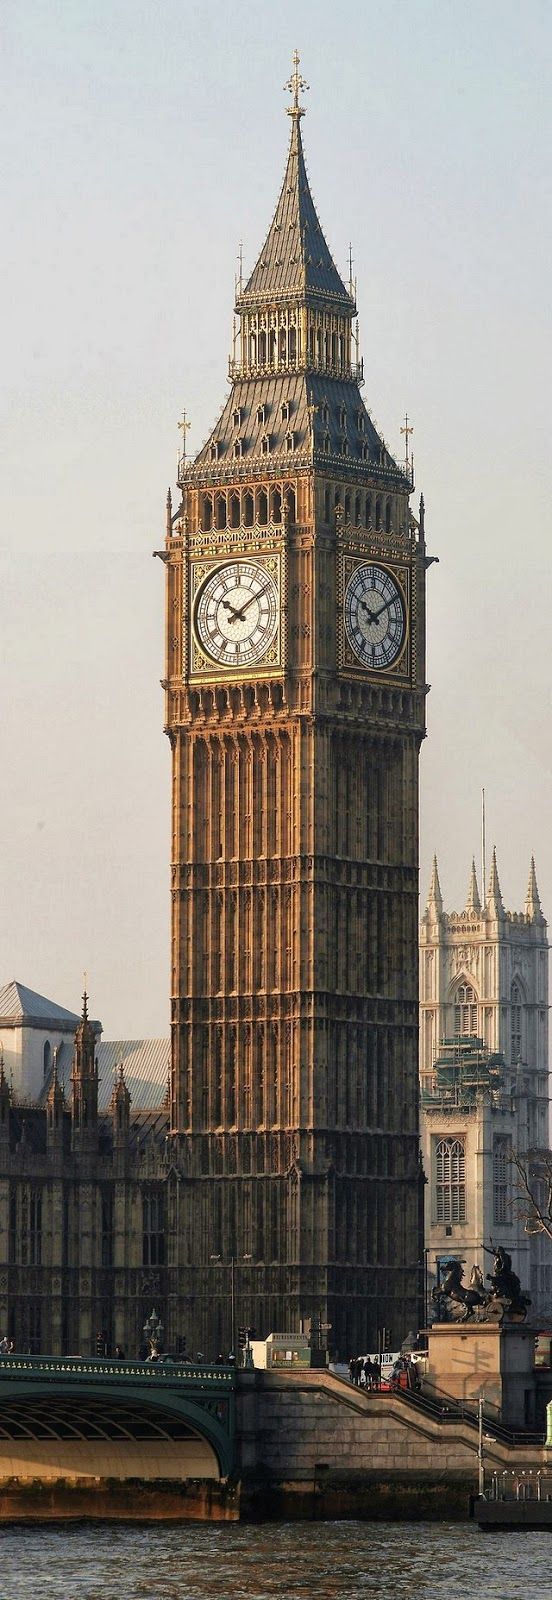 Big Ben ~ is the nickname of the Great Bell of the clock at the north end of the Palace of Westminister in London, England